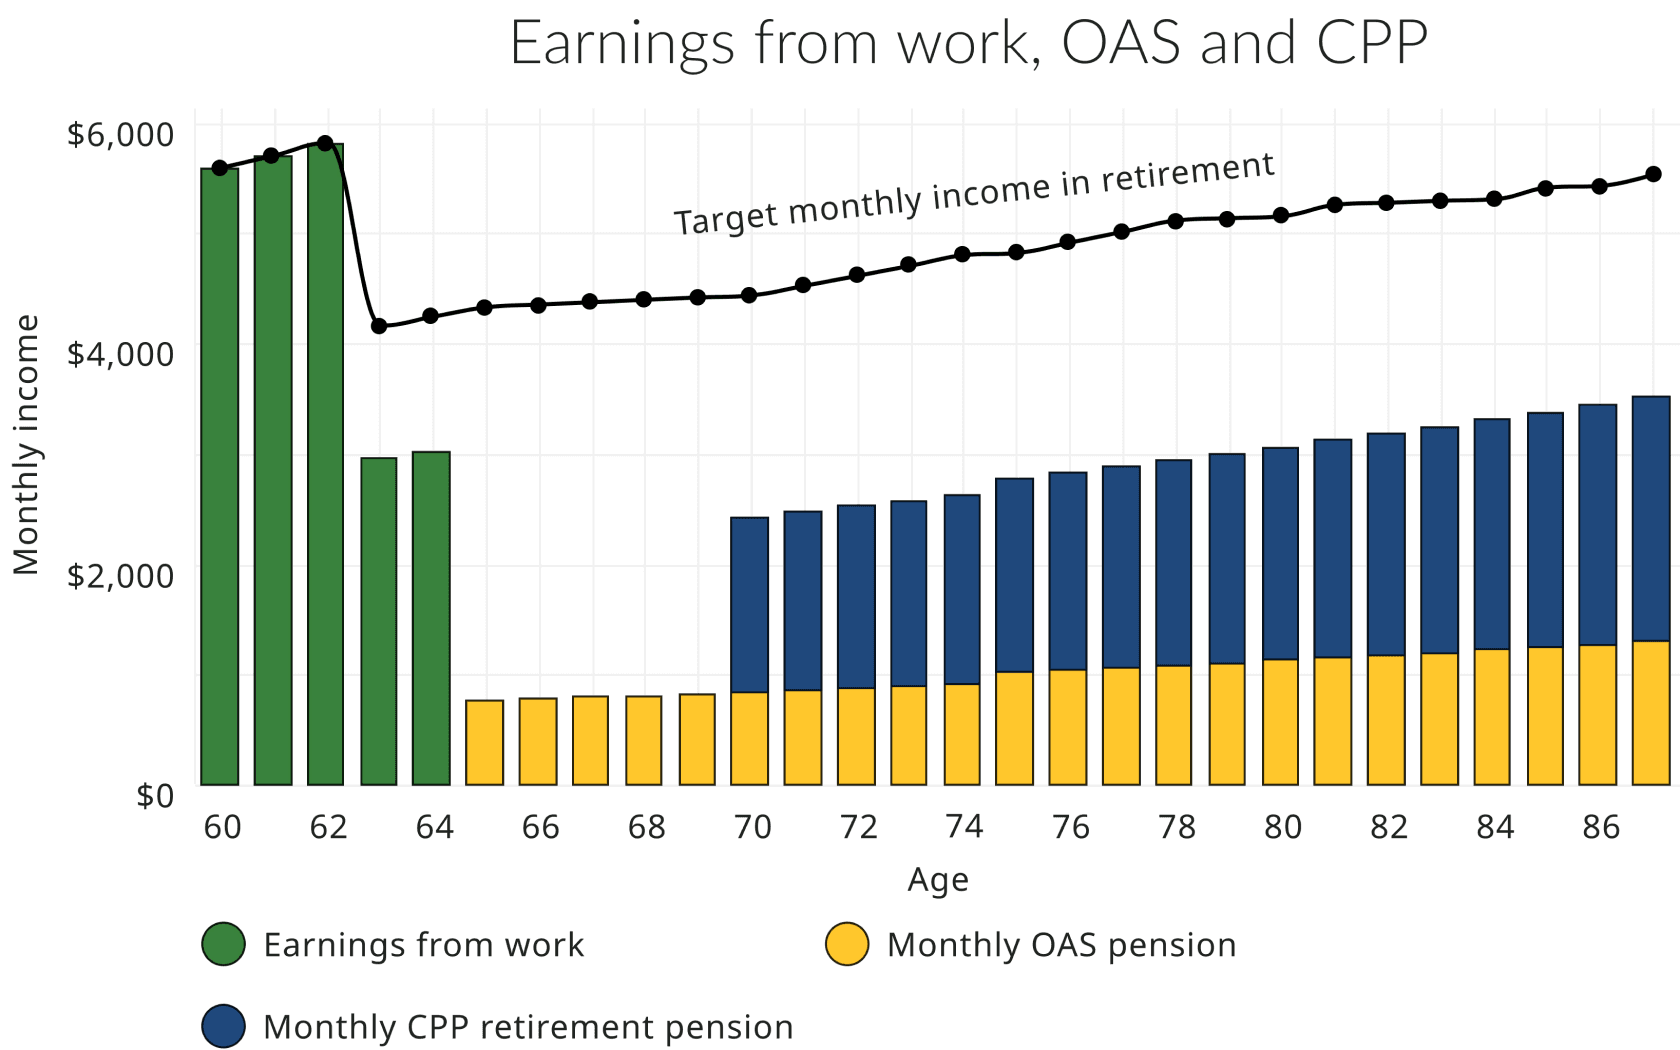 This chart shows three sources of income that Bonnie can use from age 60 to 88 for reaching her target monthly income. One is her earnings from work, another is her OAS pension and the third one is her CPP retirement pension. The chart shows Bonnie starting her OAS pension at age 65 and her CPP at age 70. The public pensions stack together to reach closer to her monthly target income in retirement, but there are still gaps. The gap in income early in retirement needs to be filled by retirement savings and investments.